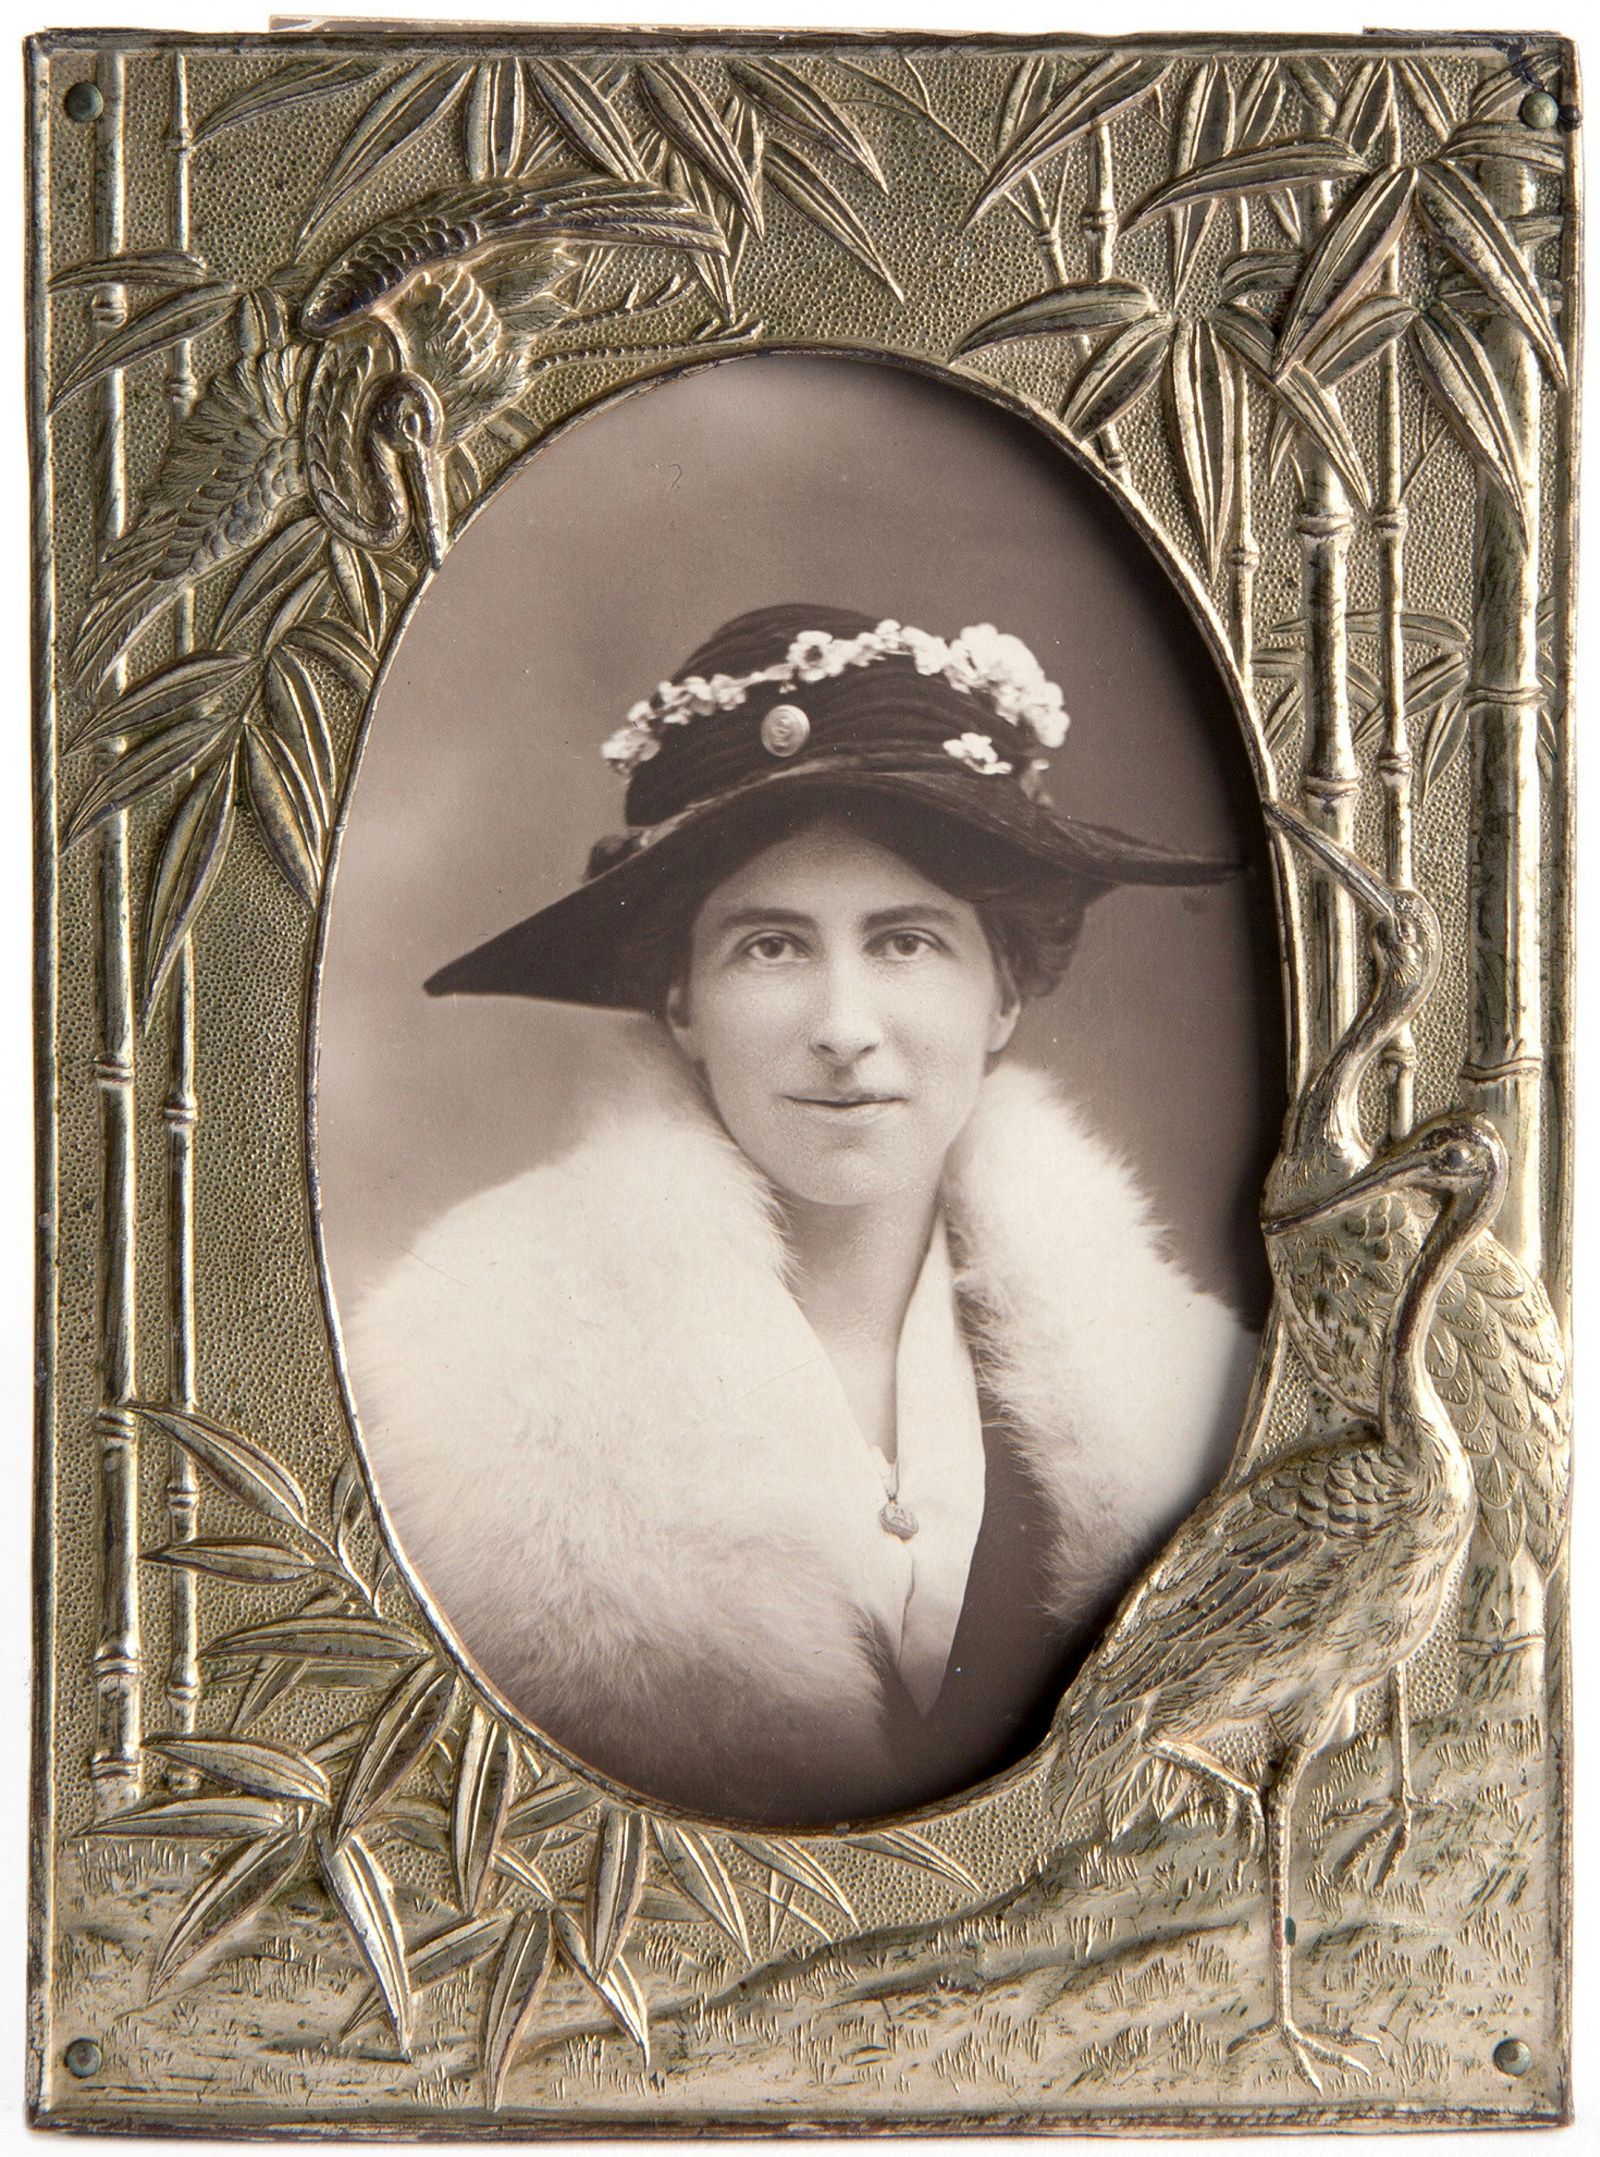 Framed platinum silver gelatin print of a woman wearing a hat trimmed with flowers.